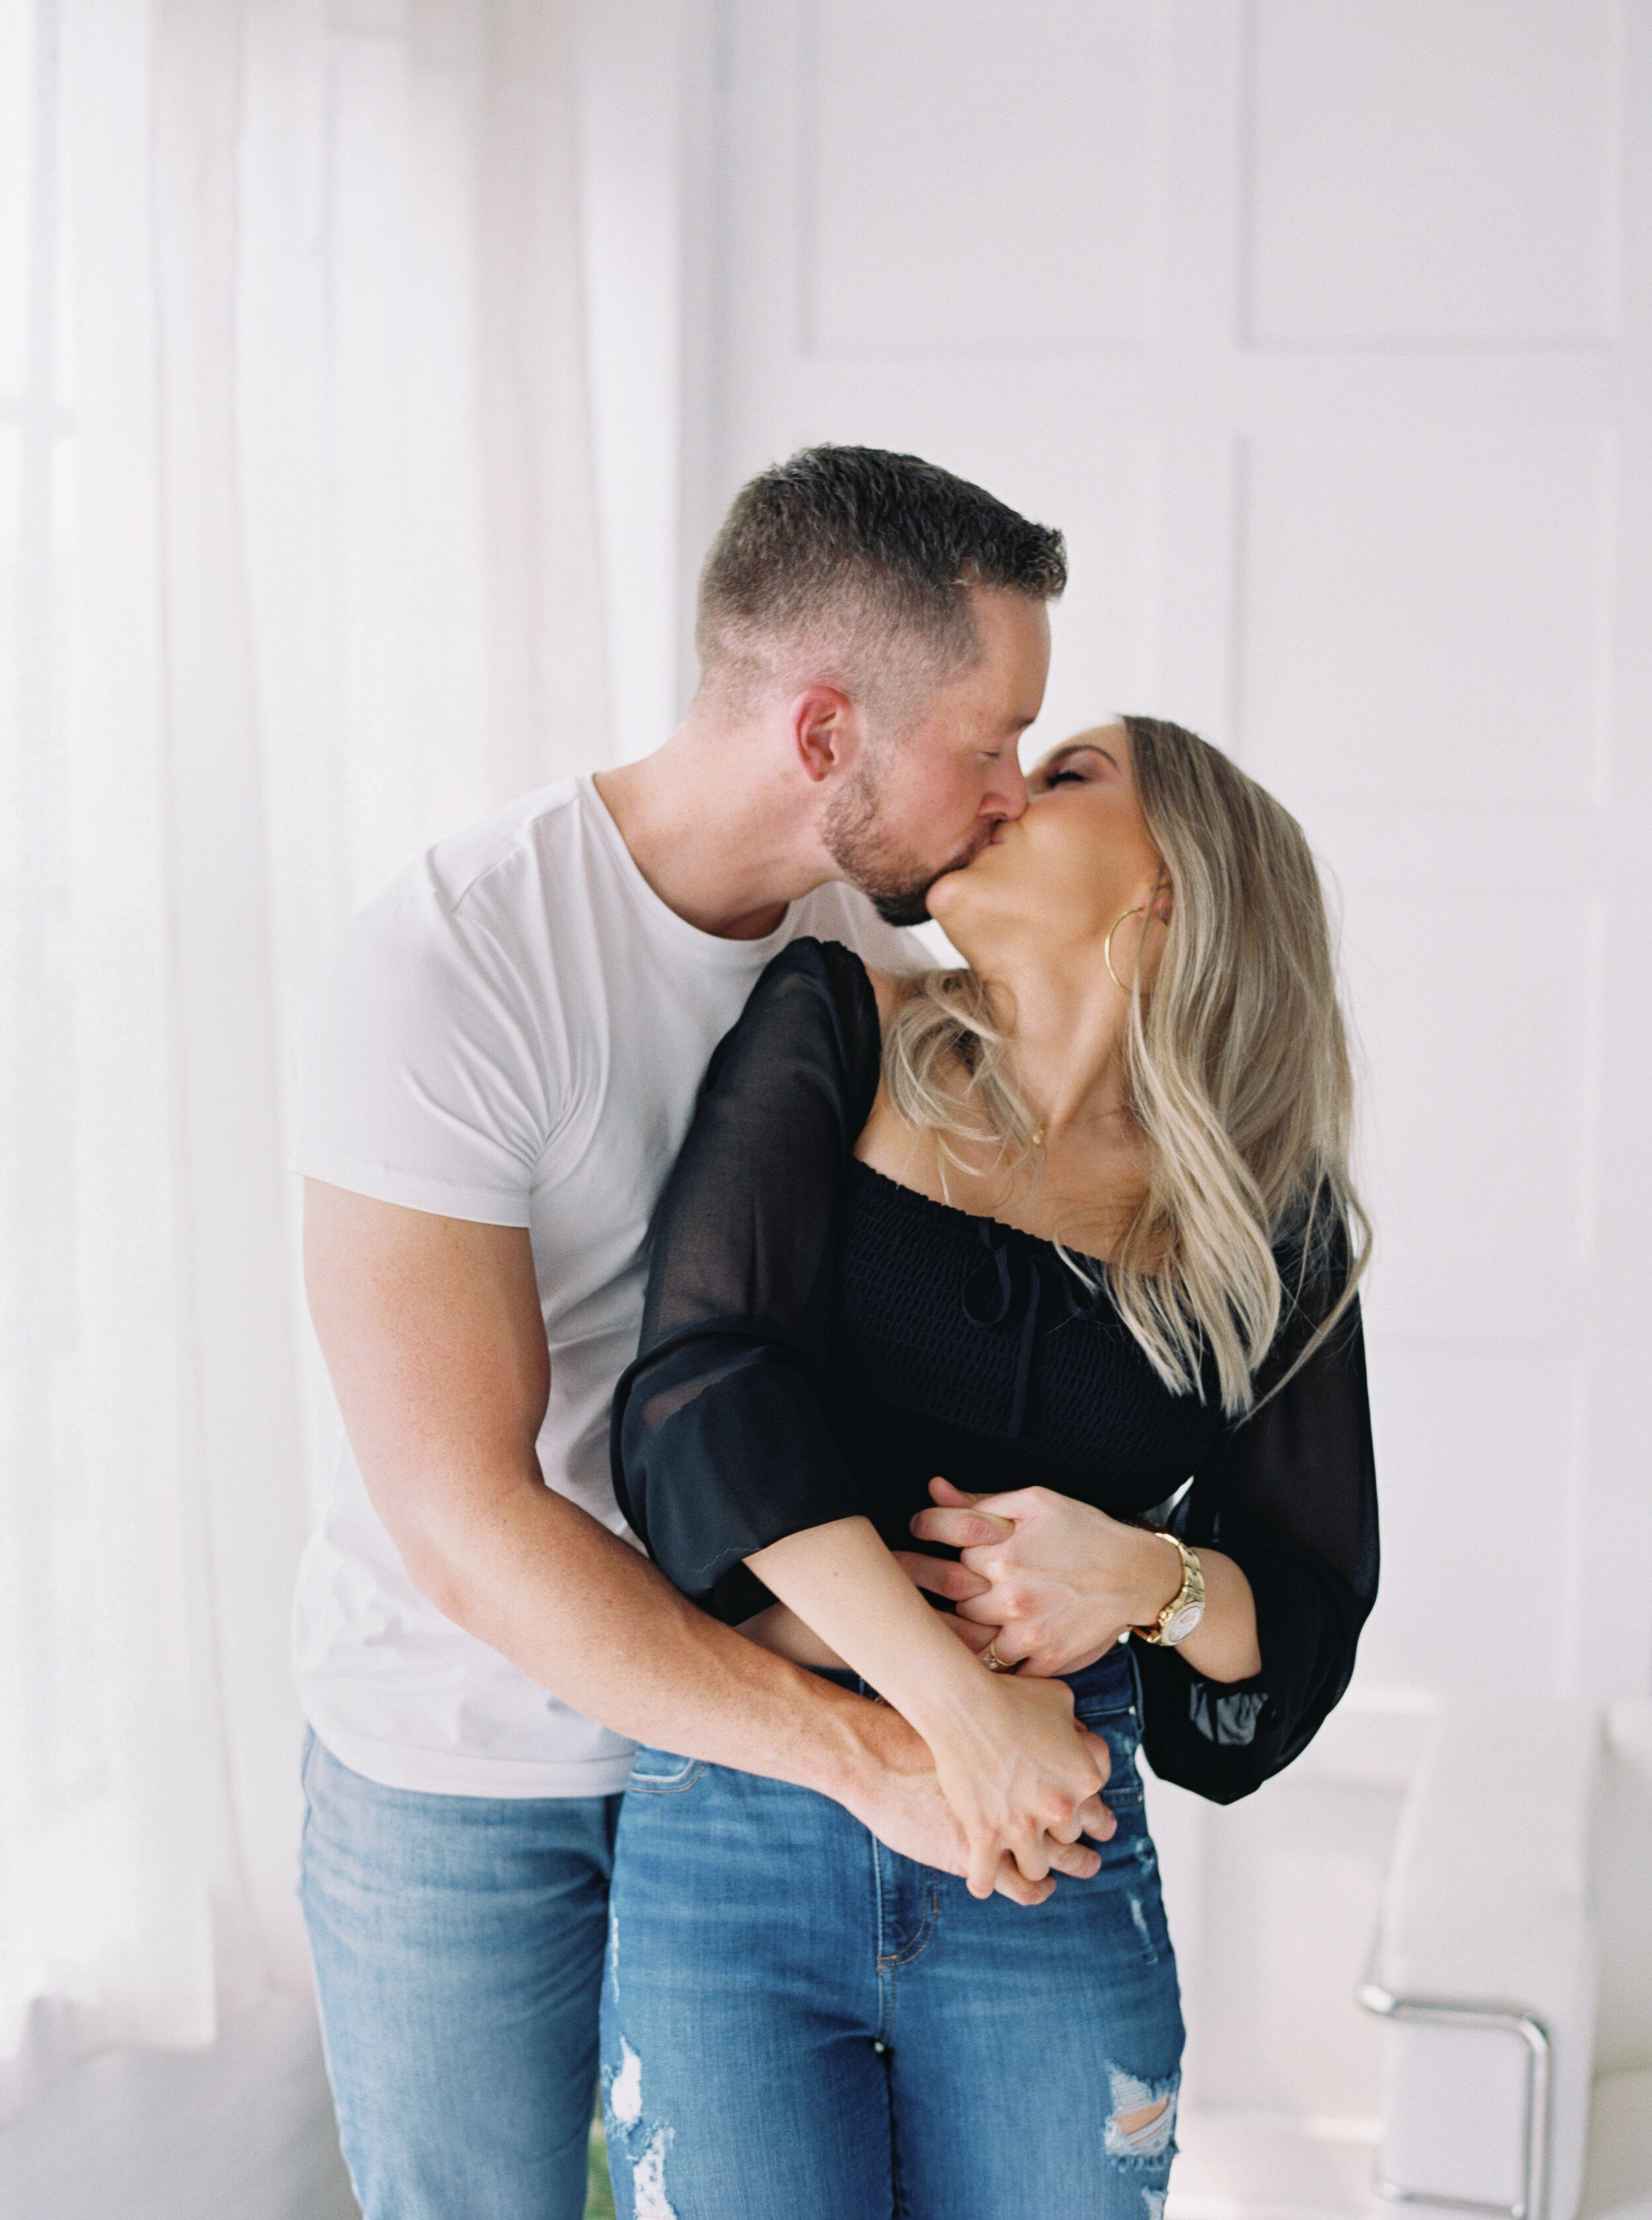 richelle-hunter-photography-kelly-nick-engagement-previews-4.jpg